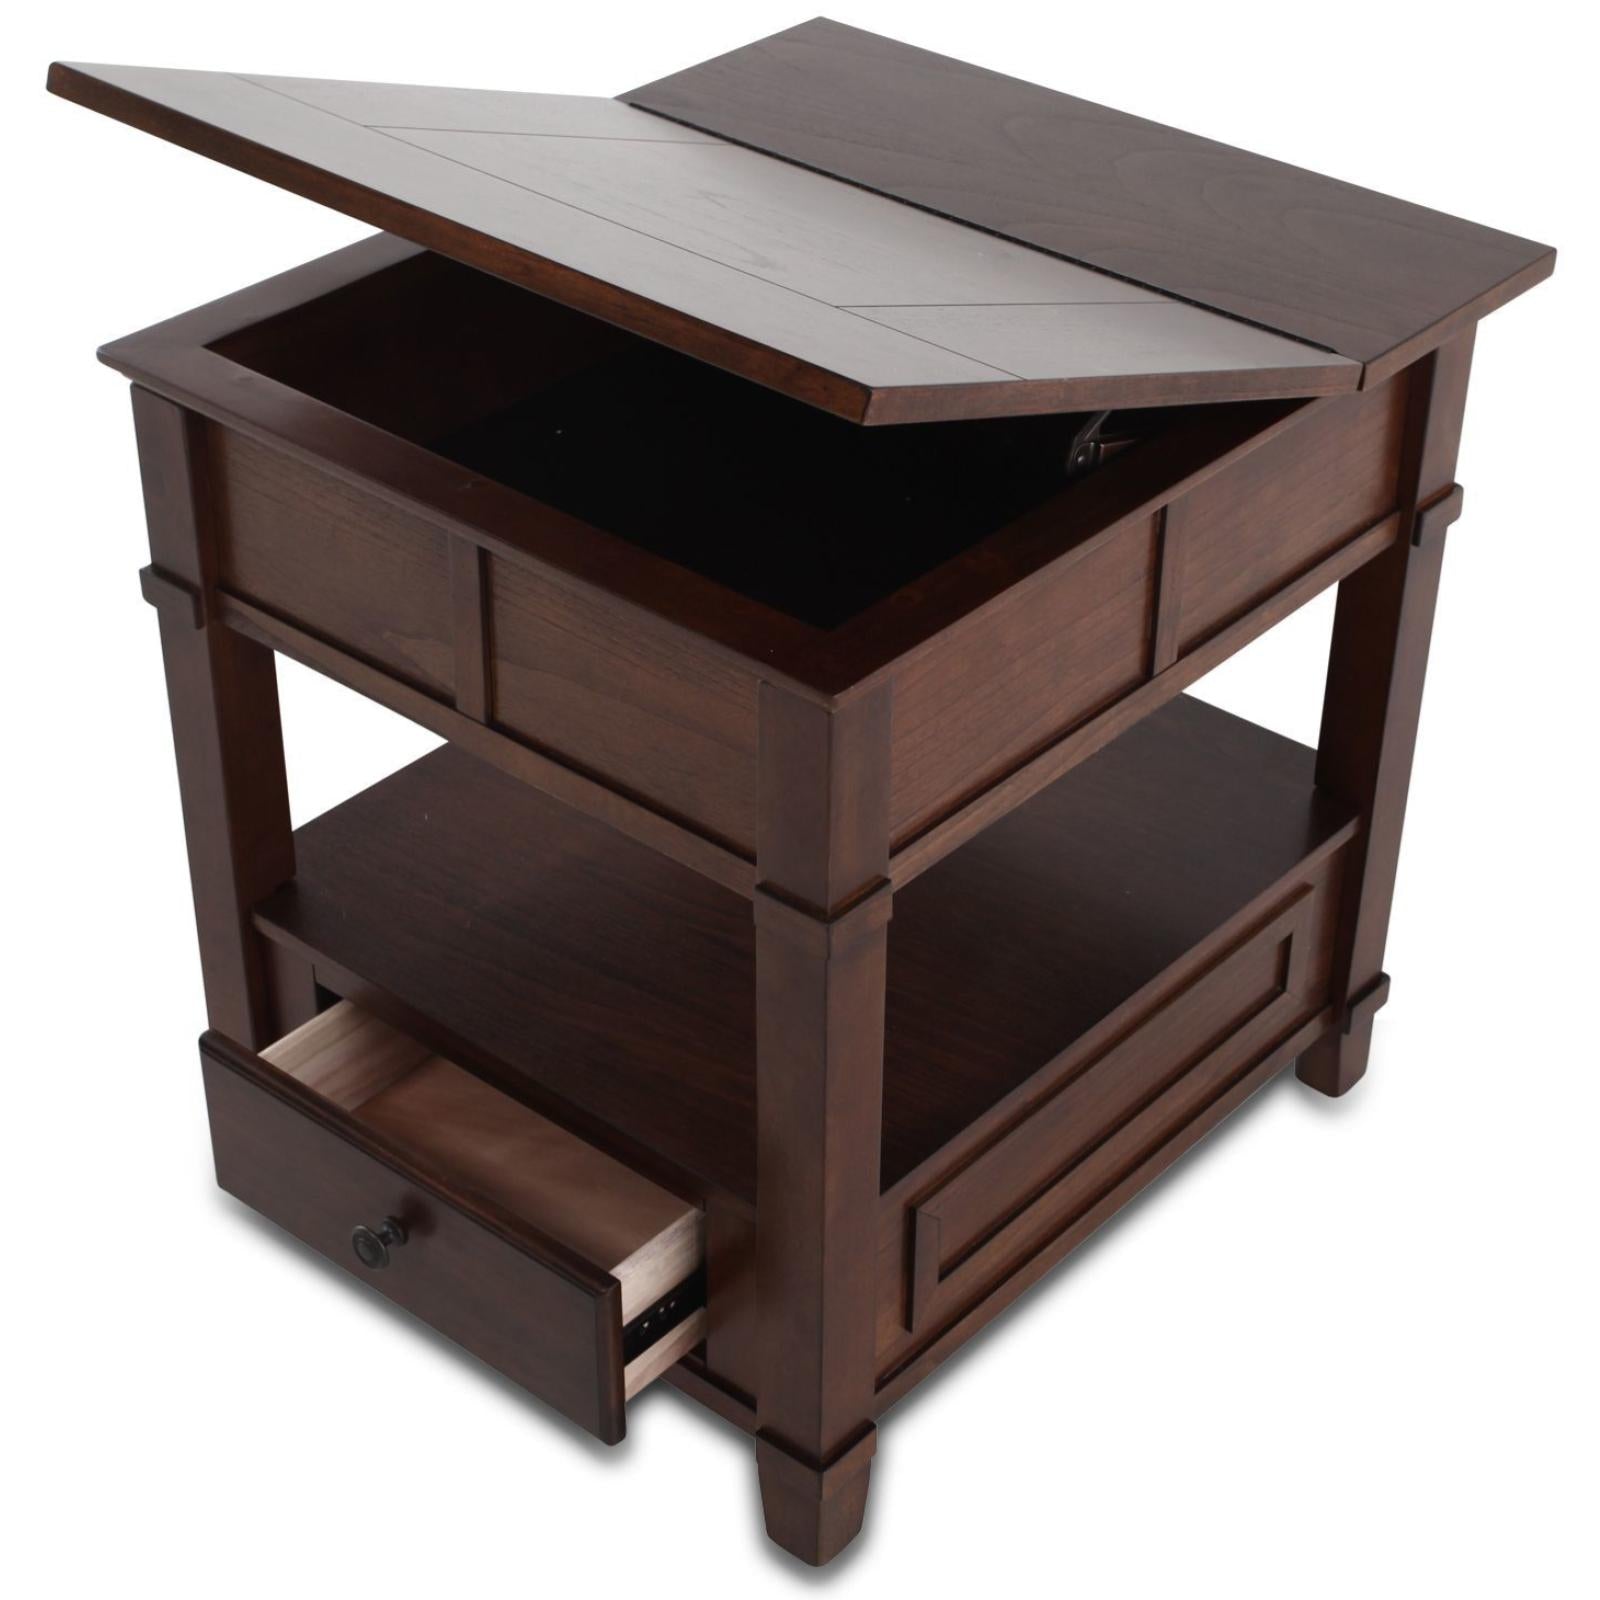 Gately Lift-Up End Table